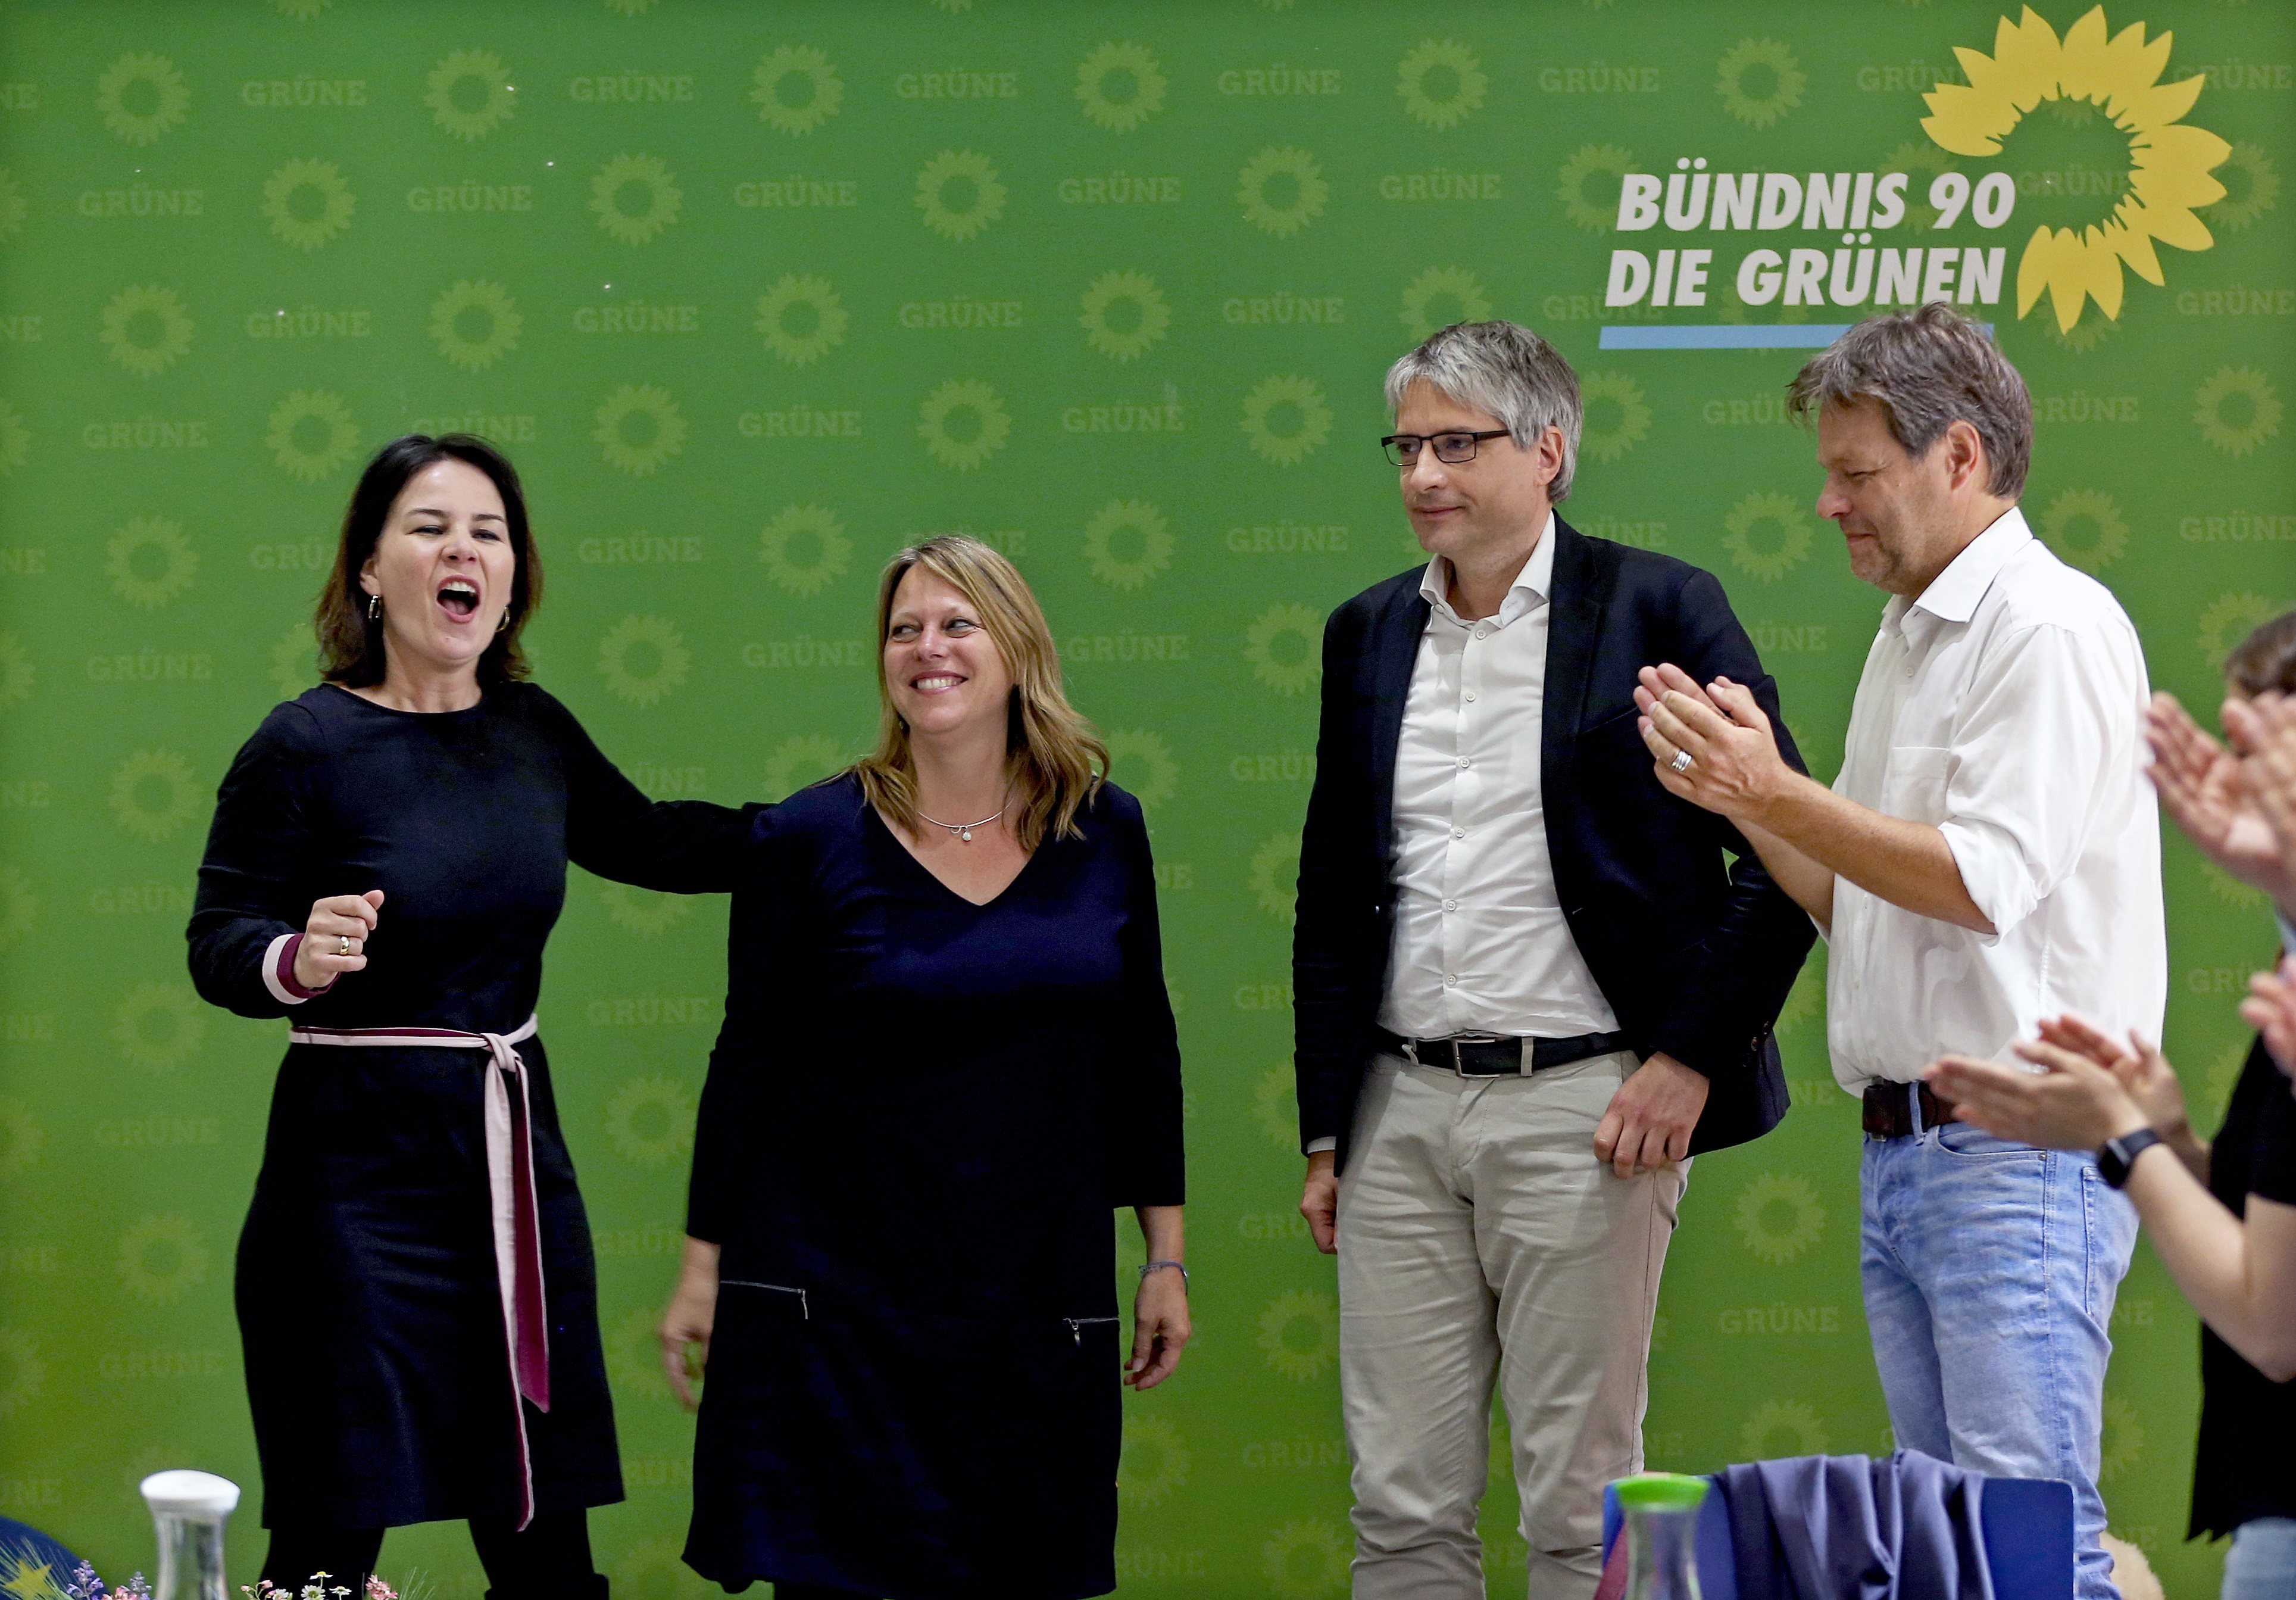 epa07605216 German top candidate of The Greens party for the European Parliament elections, Sven Giegold (2-R) and the Greens candidate for Bremen, Maine Schaefer (2-L) are congratulated by co-chairwoman Annalena Baerbock (L) and co-chairman Robert Habeck (R) as board members celebrate the European election results during a weekly meeting at the party headquarters in Berlin, Germany, 27 May 2019. The Greens experienced a raise up to 20 percent of the votes in the European elections in Germany. The European Parliament election was held by member countries of the European Union (EU) from 23 to 26 May 2019.  EPA/FELIPE TRUEBA